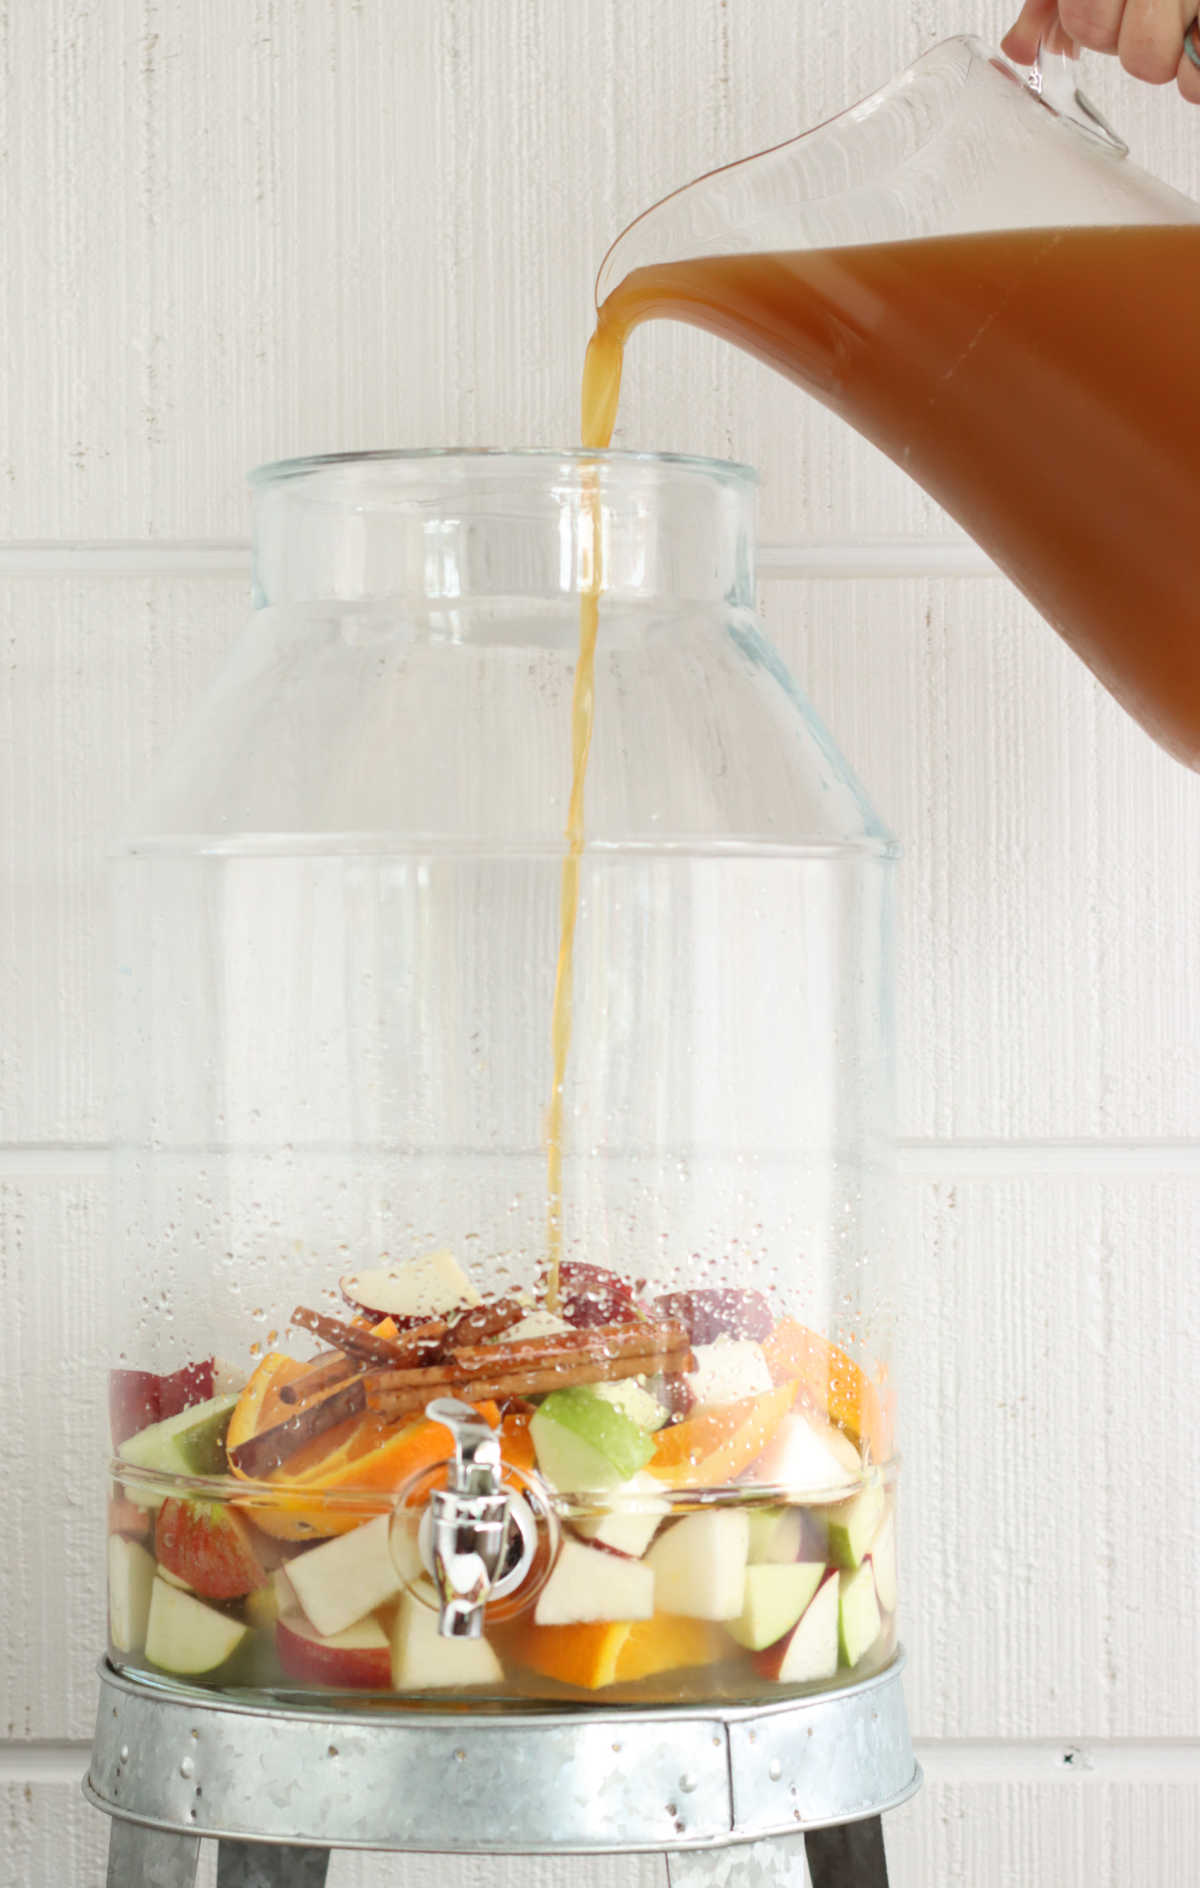 Pouring apple cider into glass drink dispenser filled with chunks of apples and oranges.